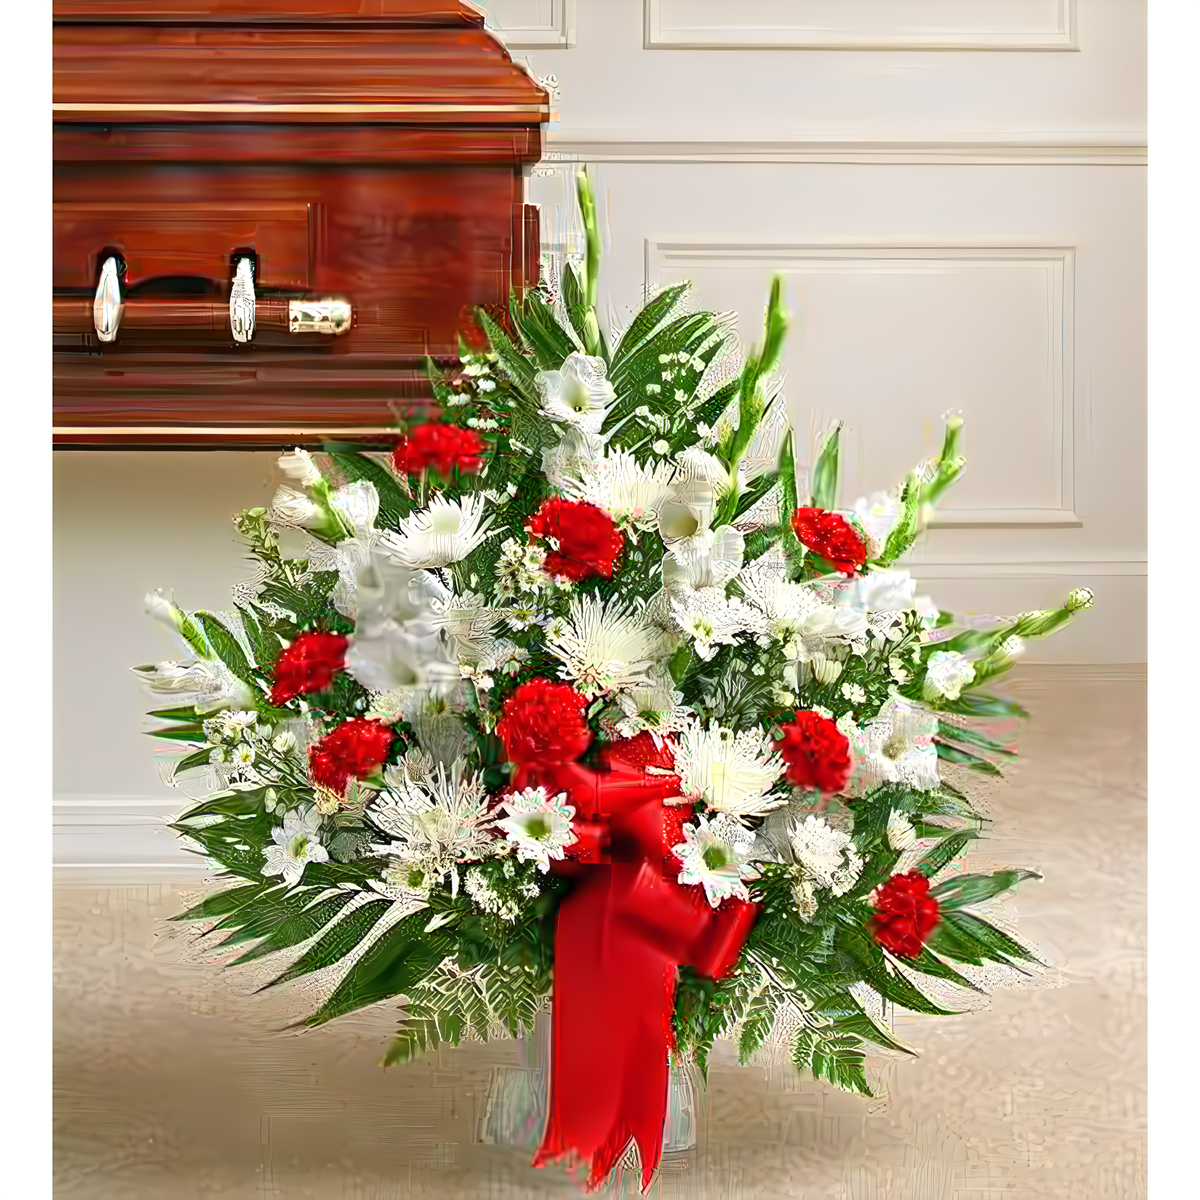 Tribute Red &amp; White Floor Basket Arrangement - Funeral &gt; For the Service